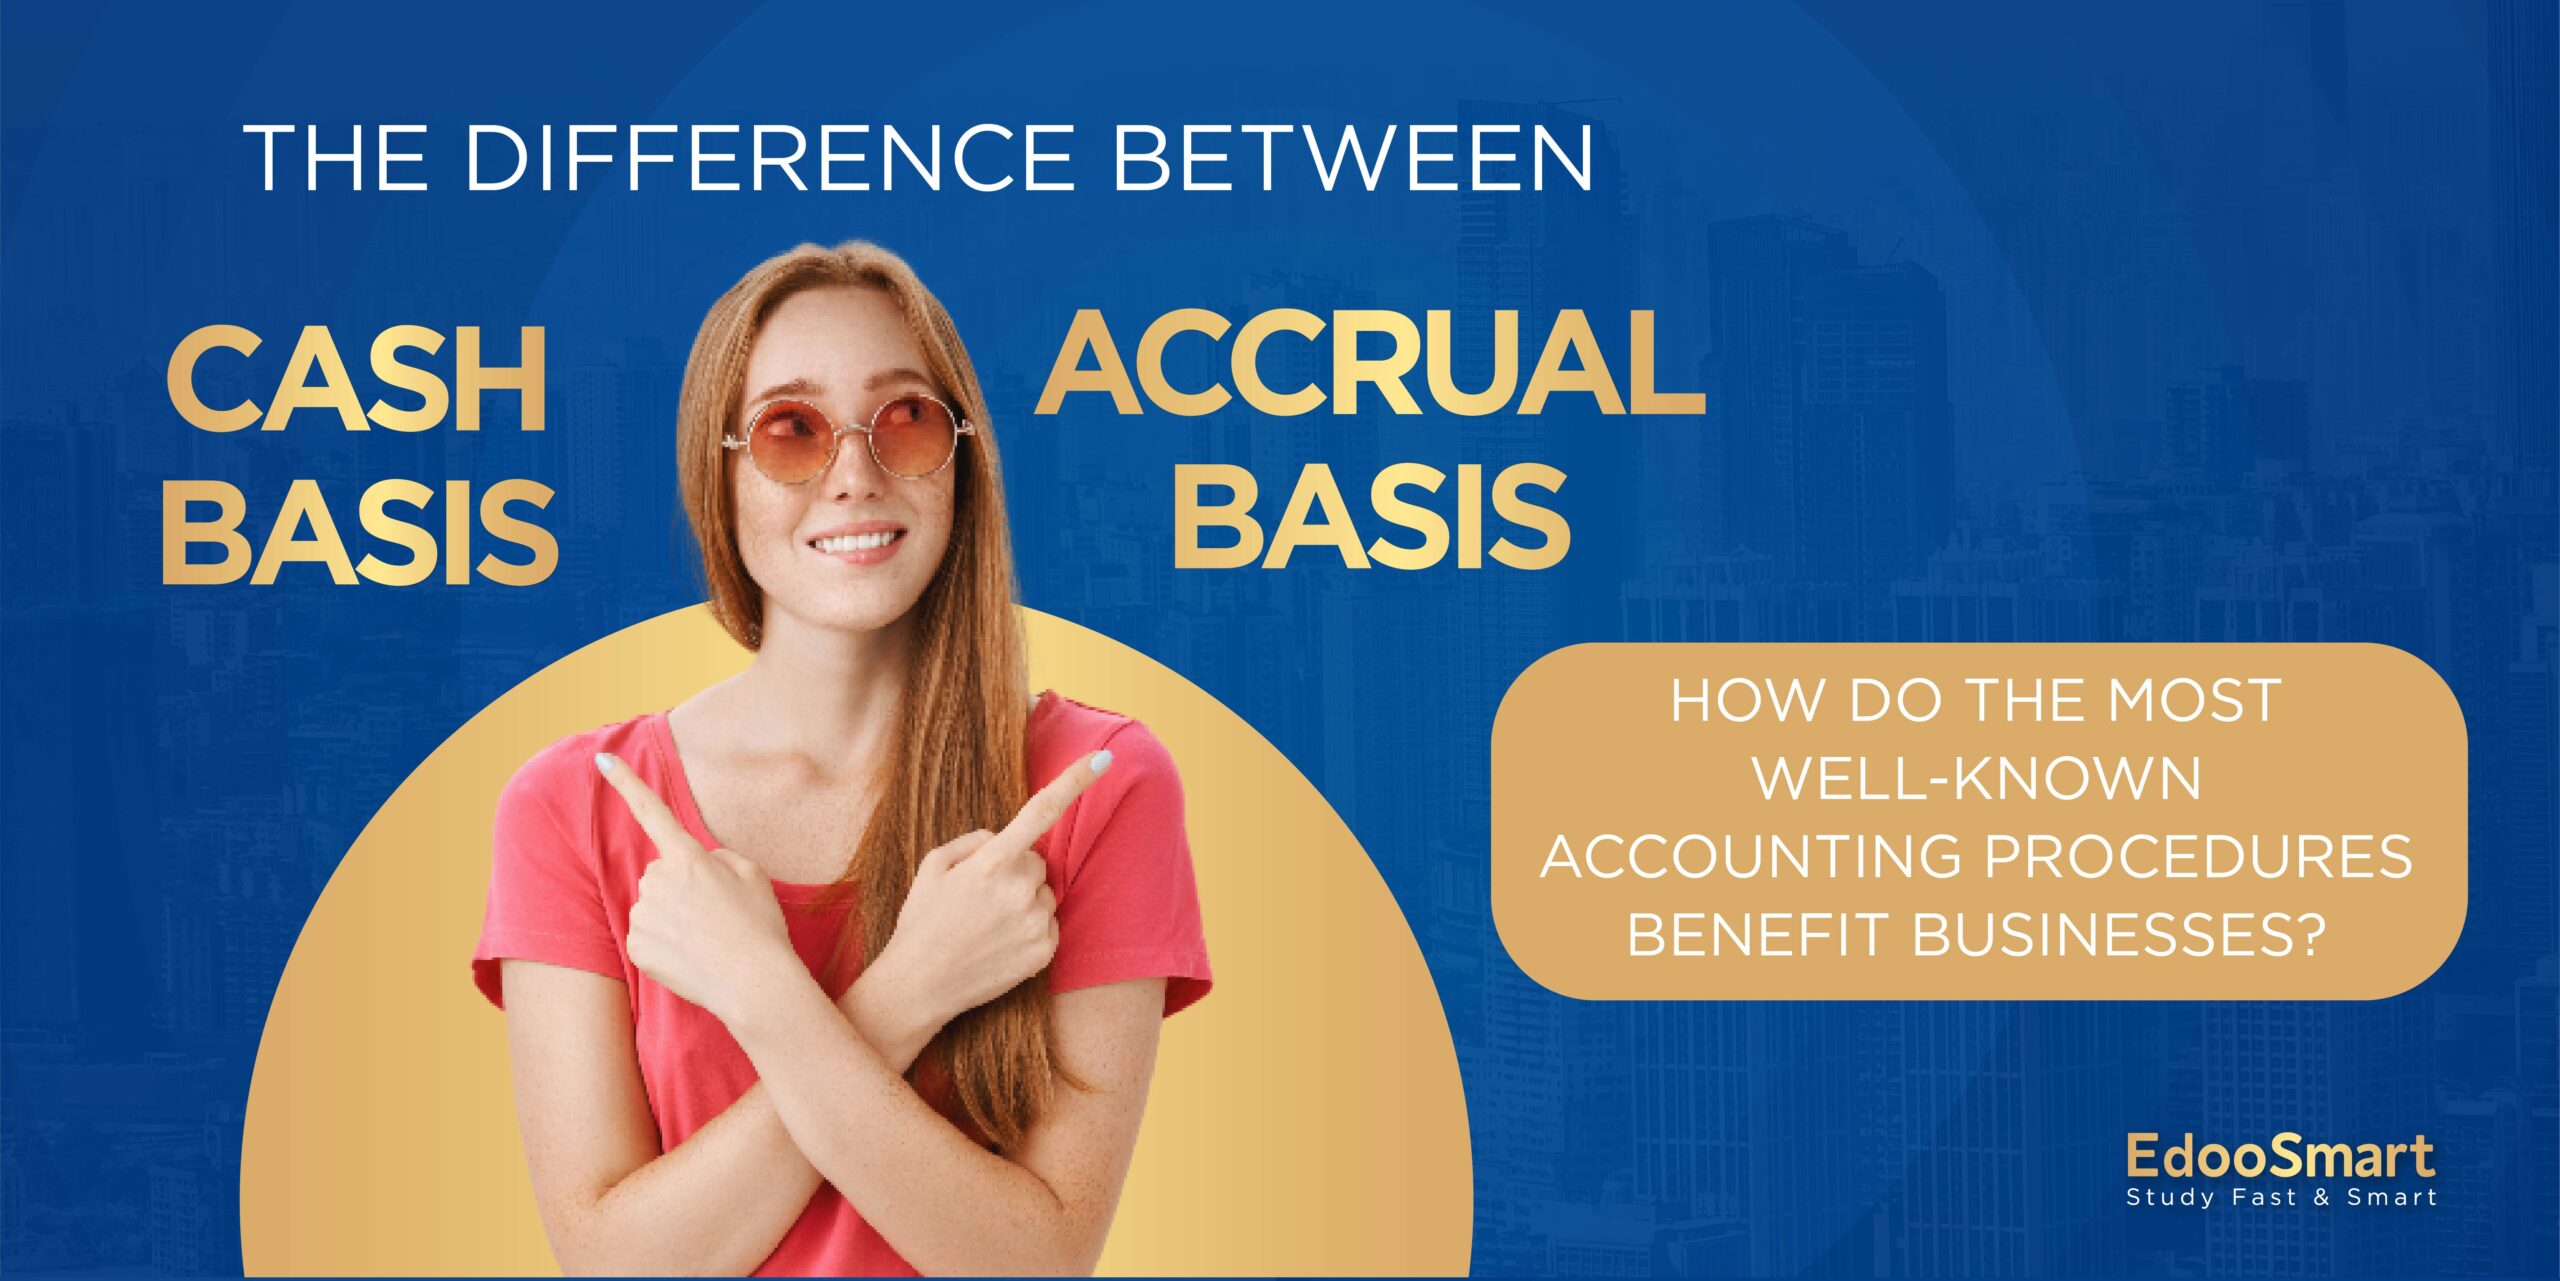 The difference between Cash Basis and Accrual Basis? How do the most well-known accounting basis benefit businesses?